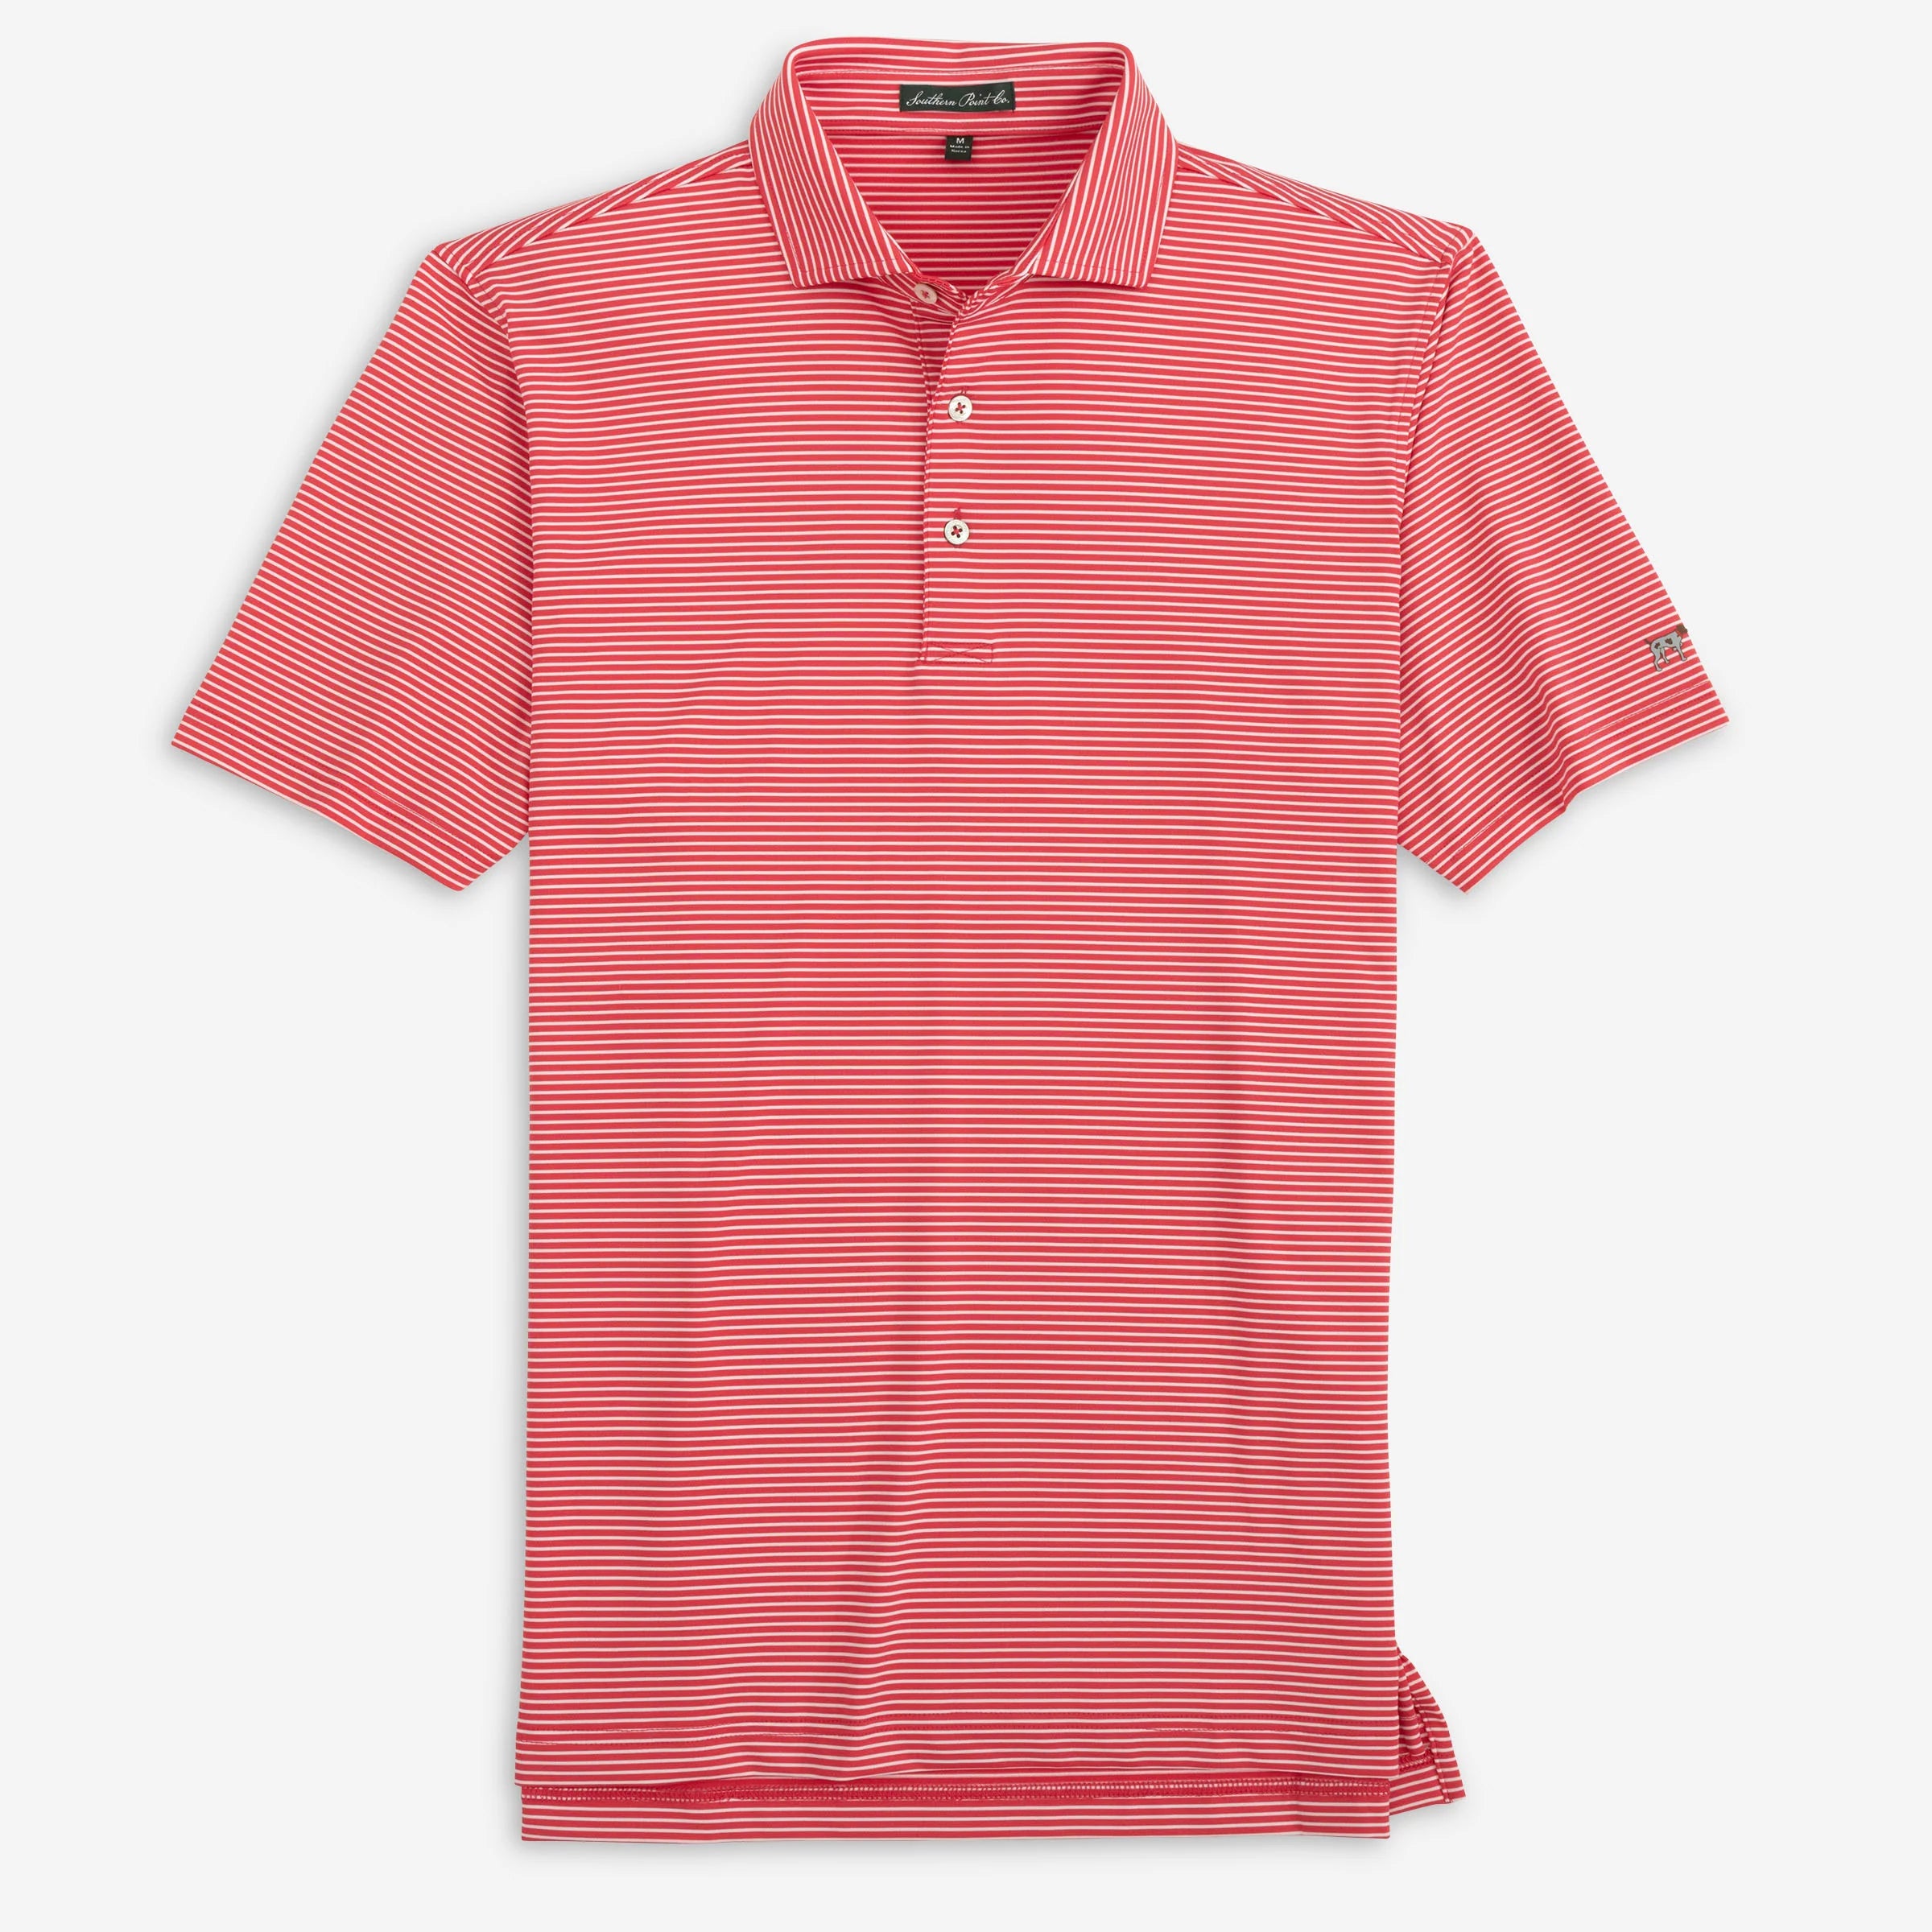 Dune Stripe YOUTH Polo in Washed Red by Southern Point Co.